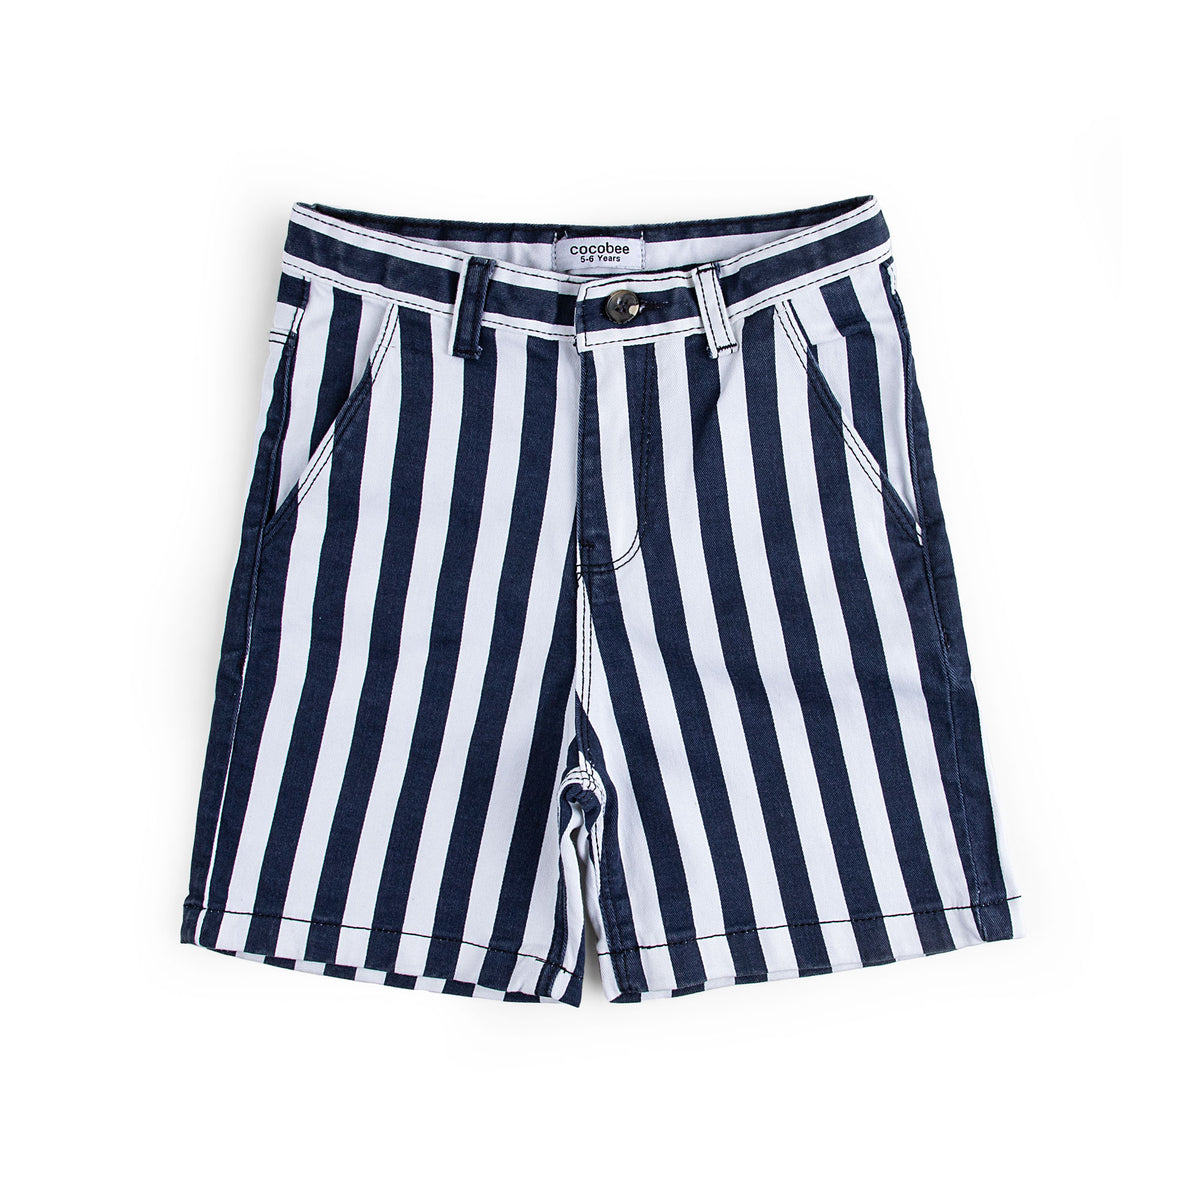 Stripped Cotton short – cocobee